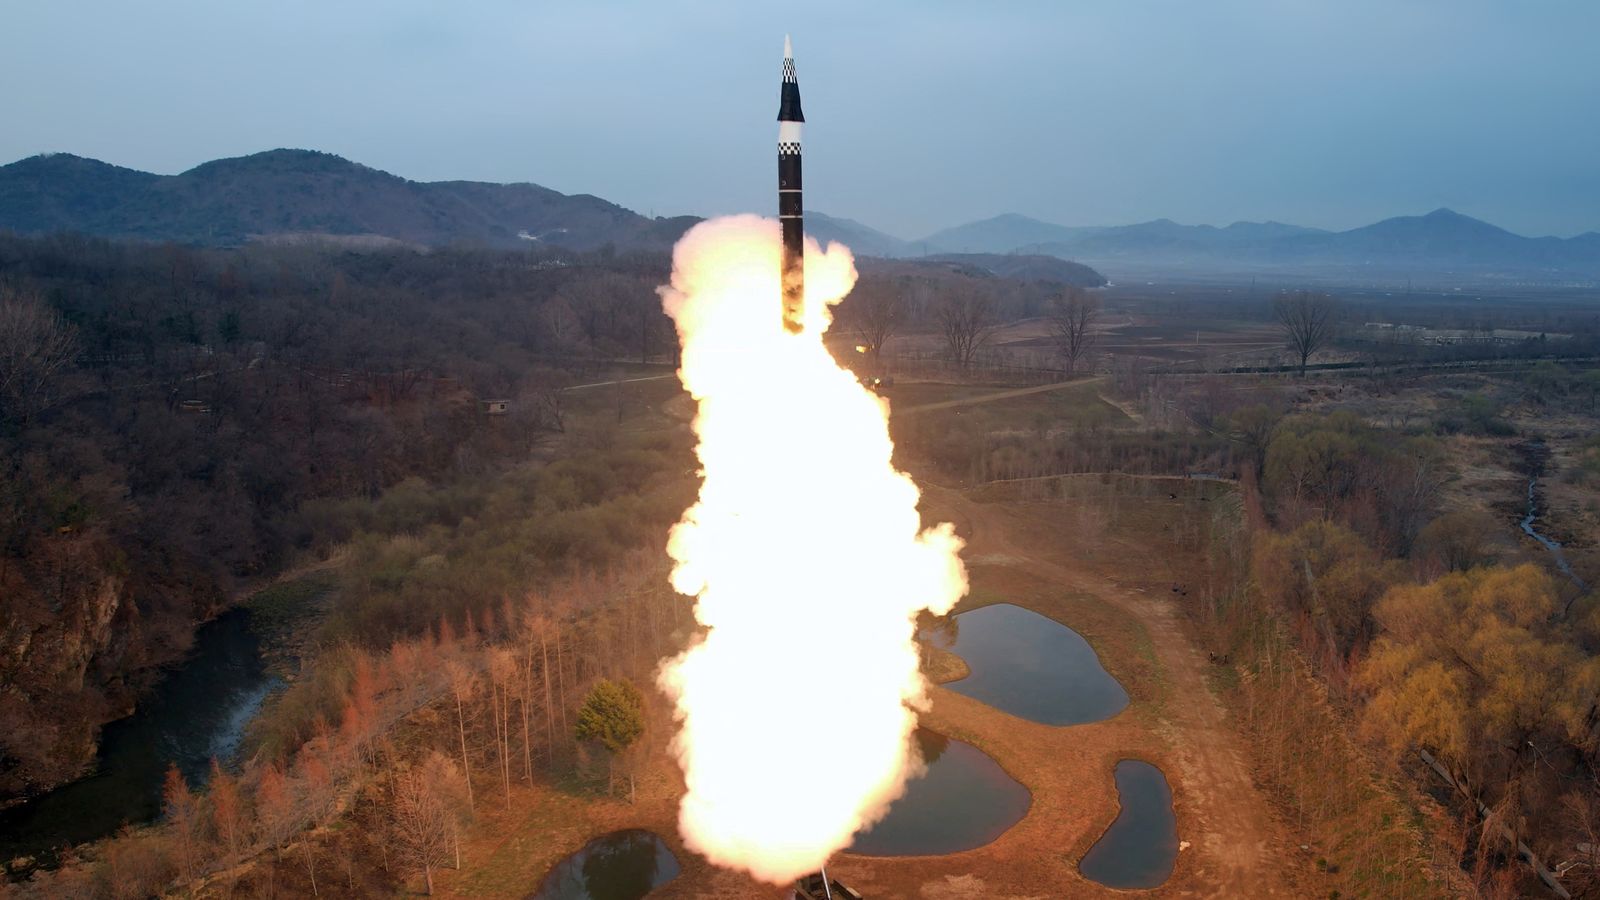 North Korea fires potential hypersonic missile towards sea, South Korea says